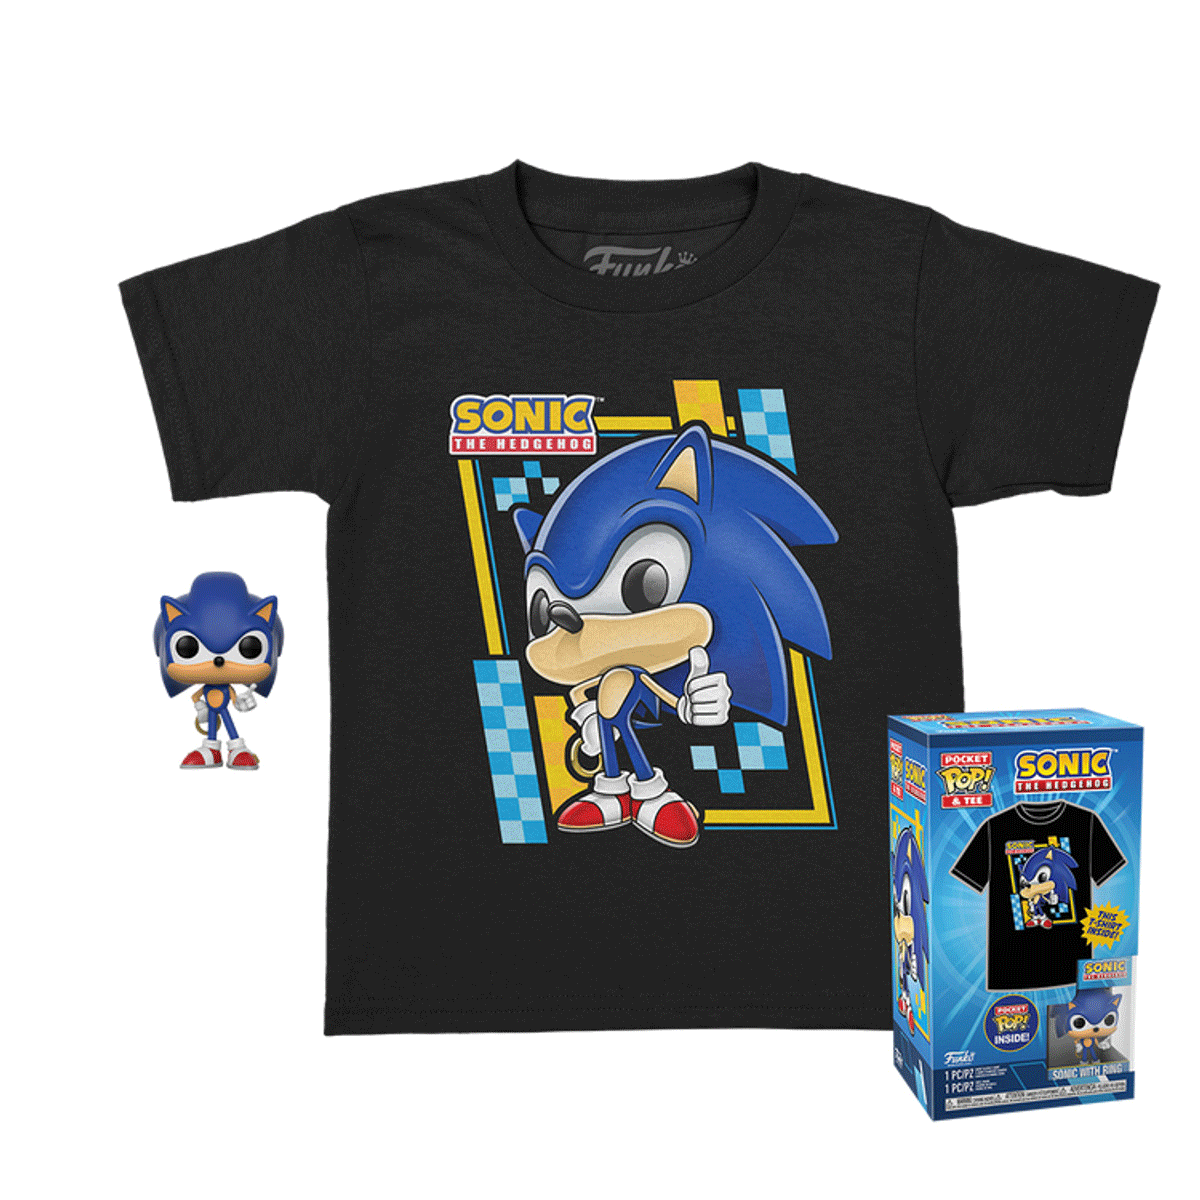 Sega Sonic the Hedgehog with Ring Pocket Pop! Vinyl and Tee Set for Kids - GeekCore